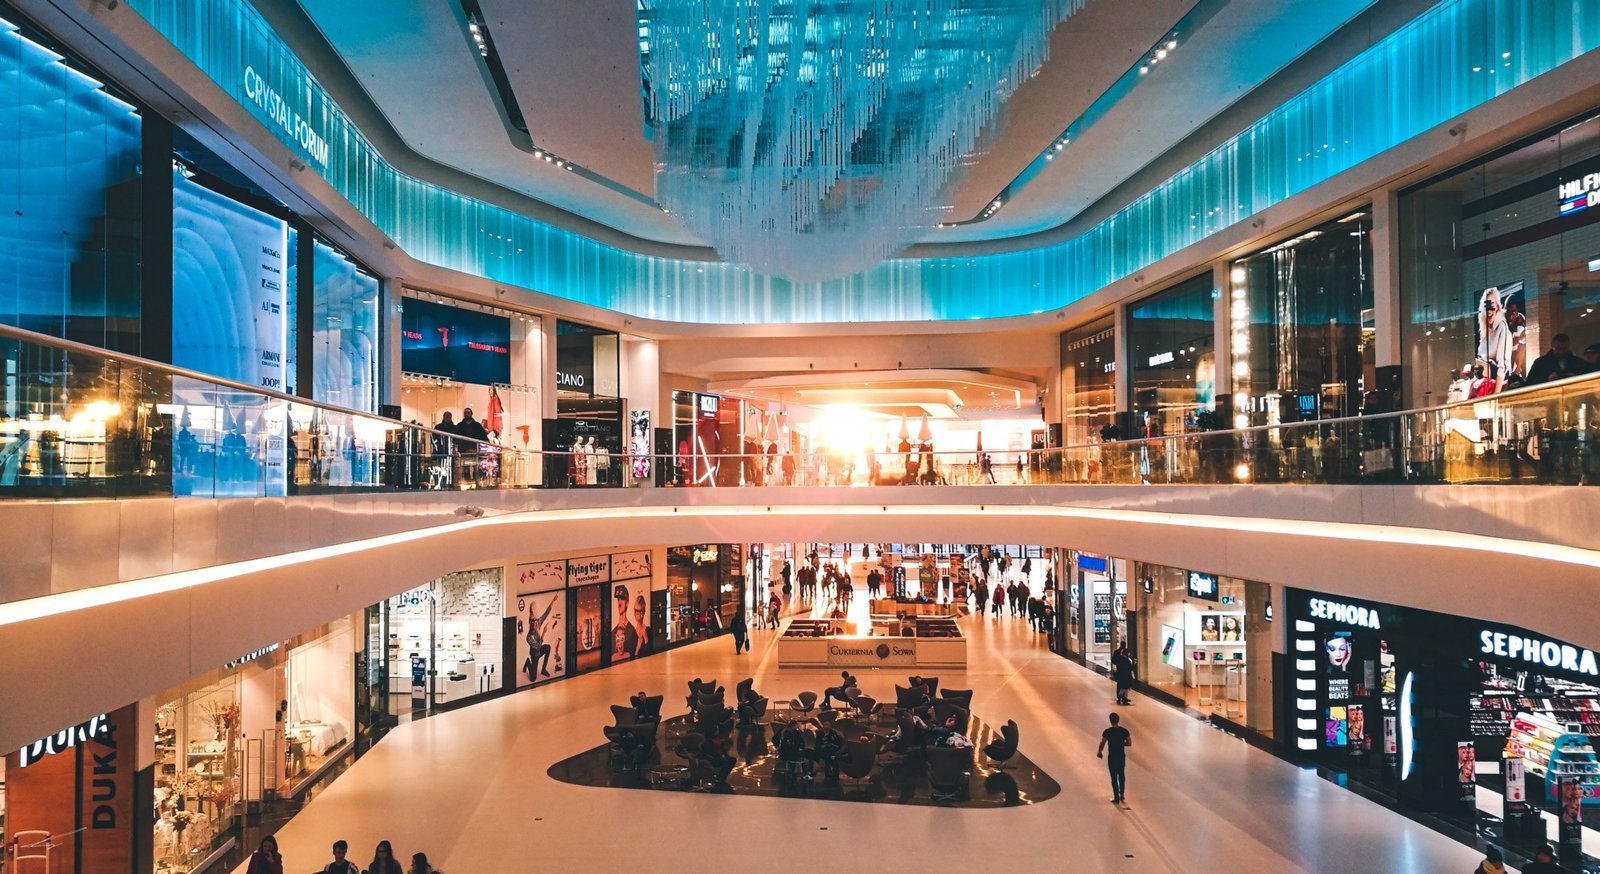 Top 5 Shopping Malls in USA